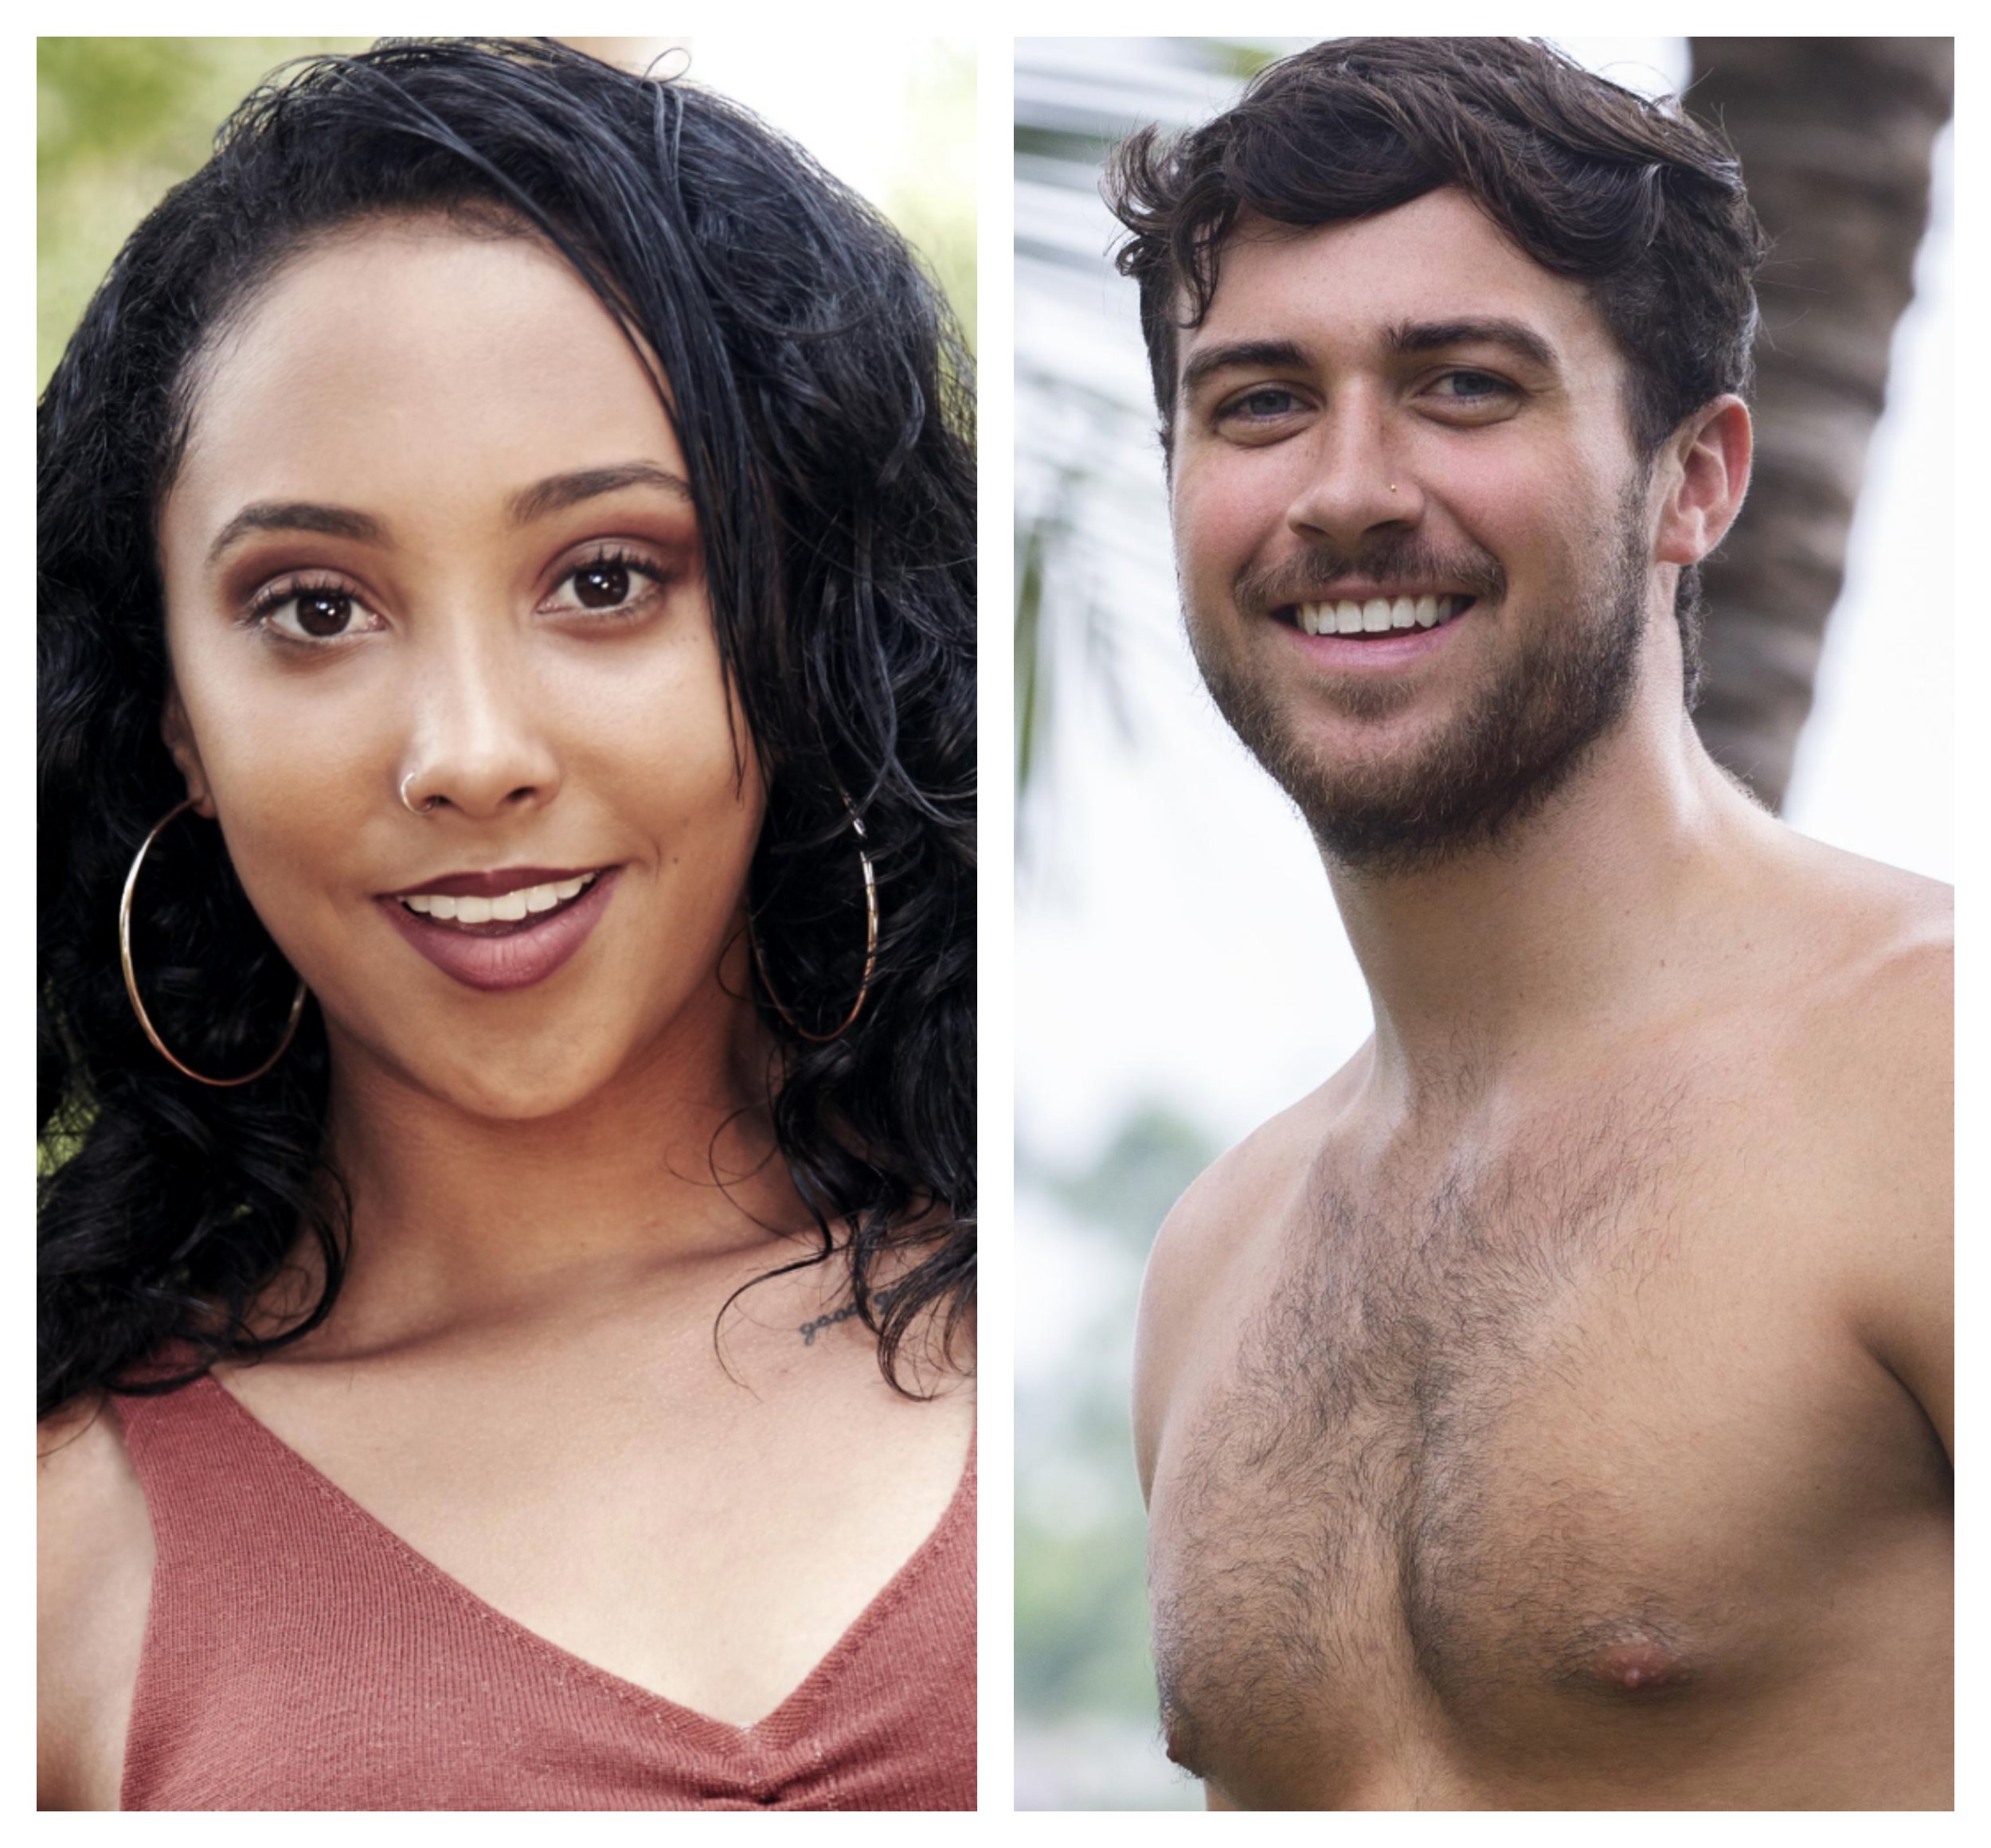 Are You The One?' Season 7 Premiere Reveals First Perfect Match? [Spoilers]